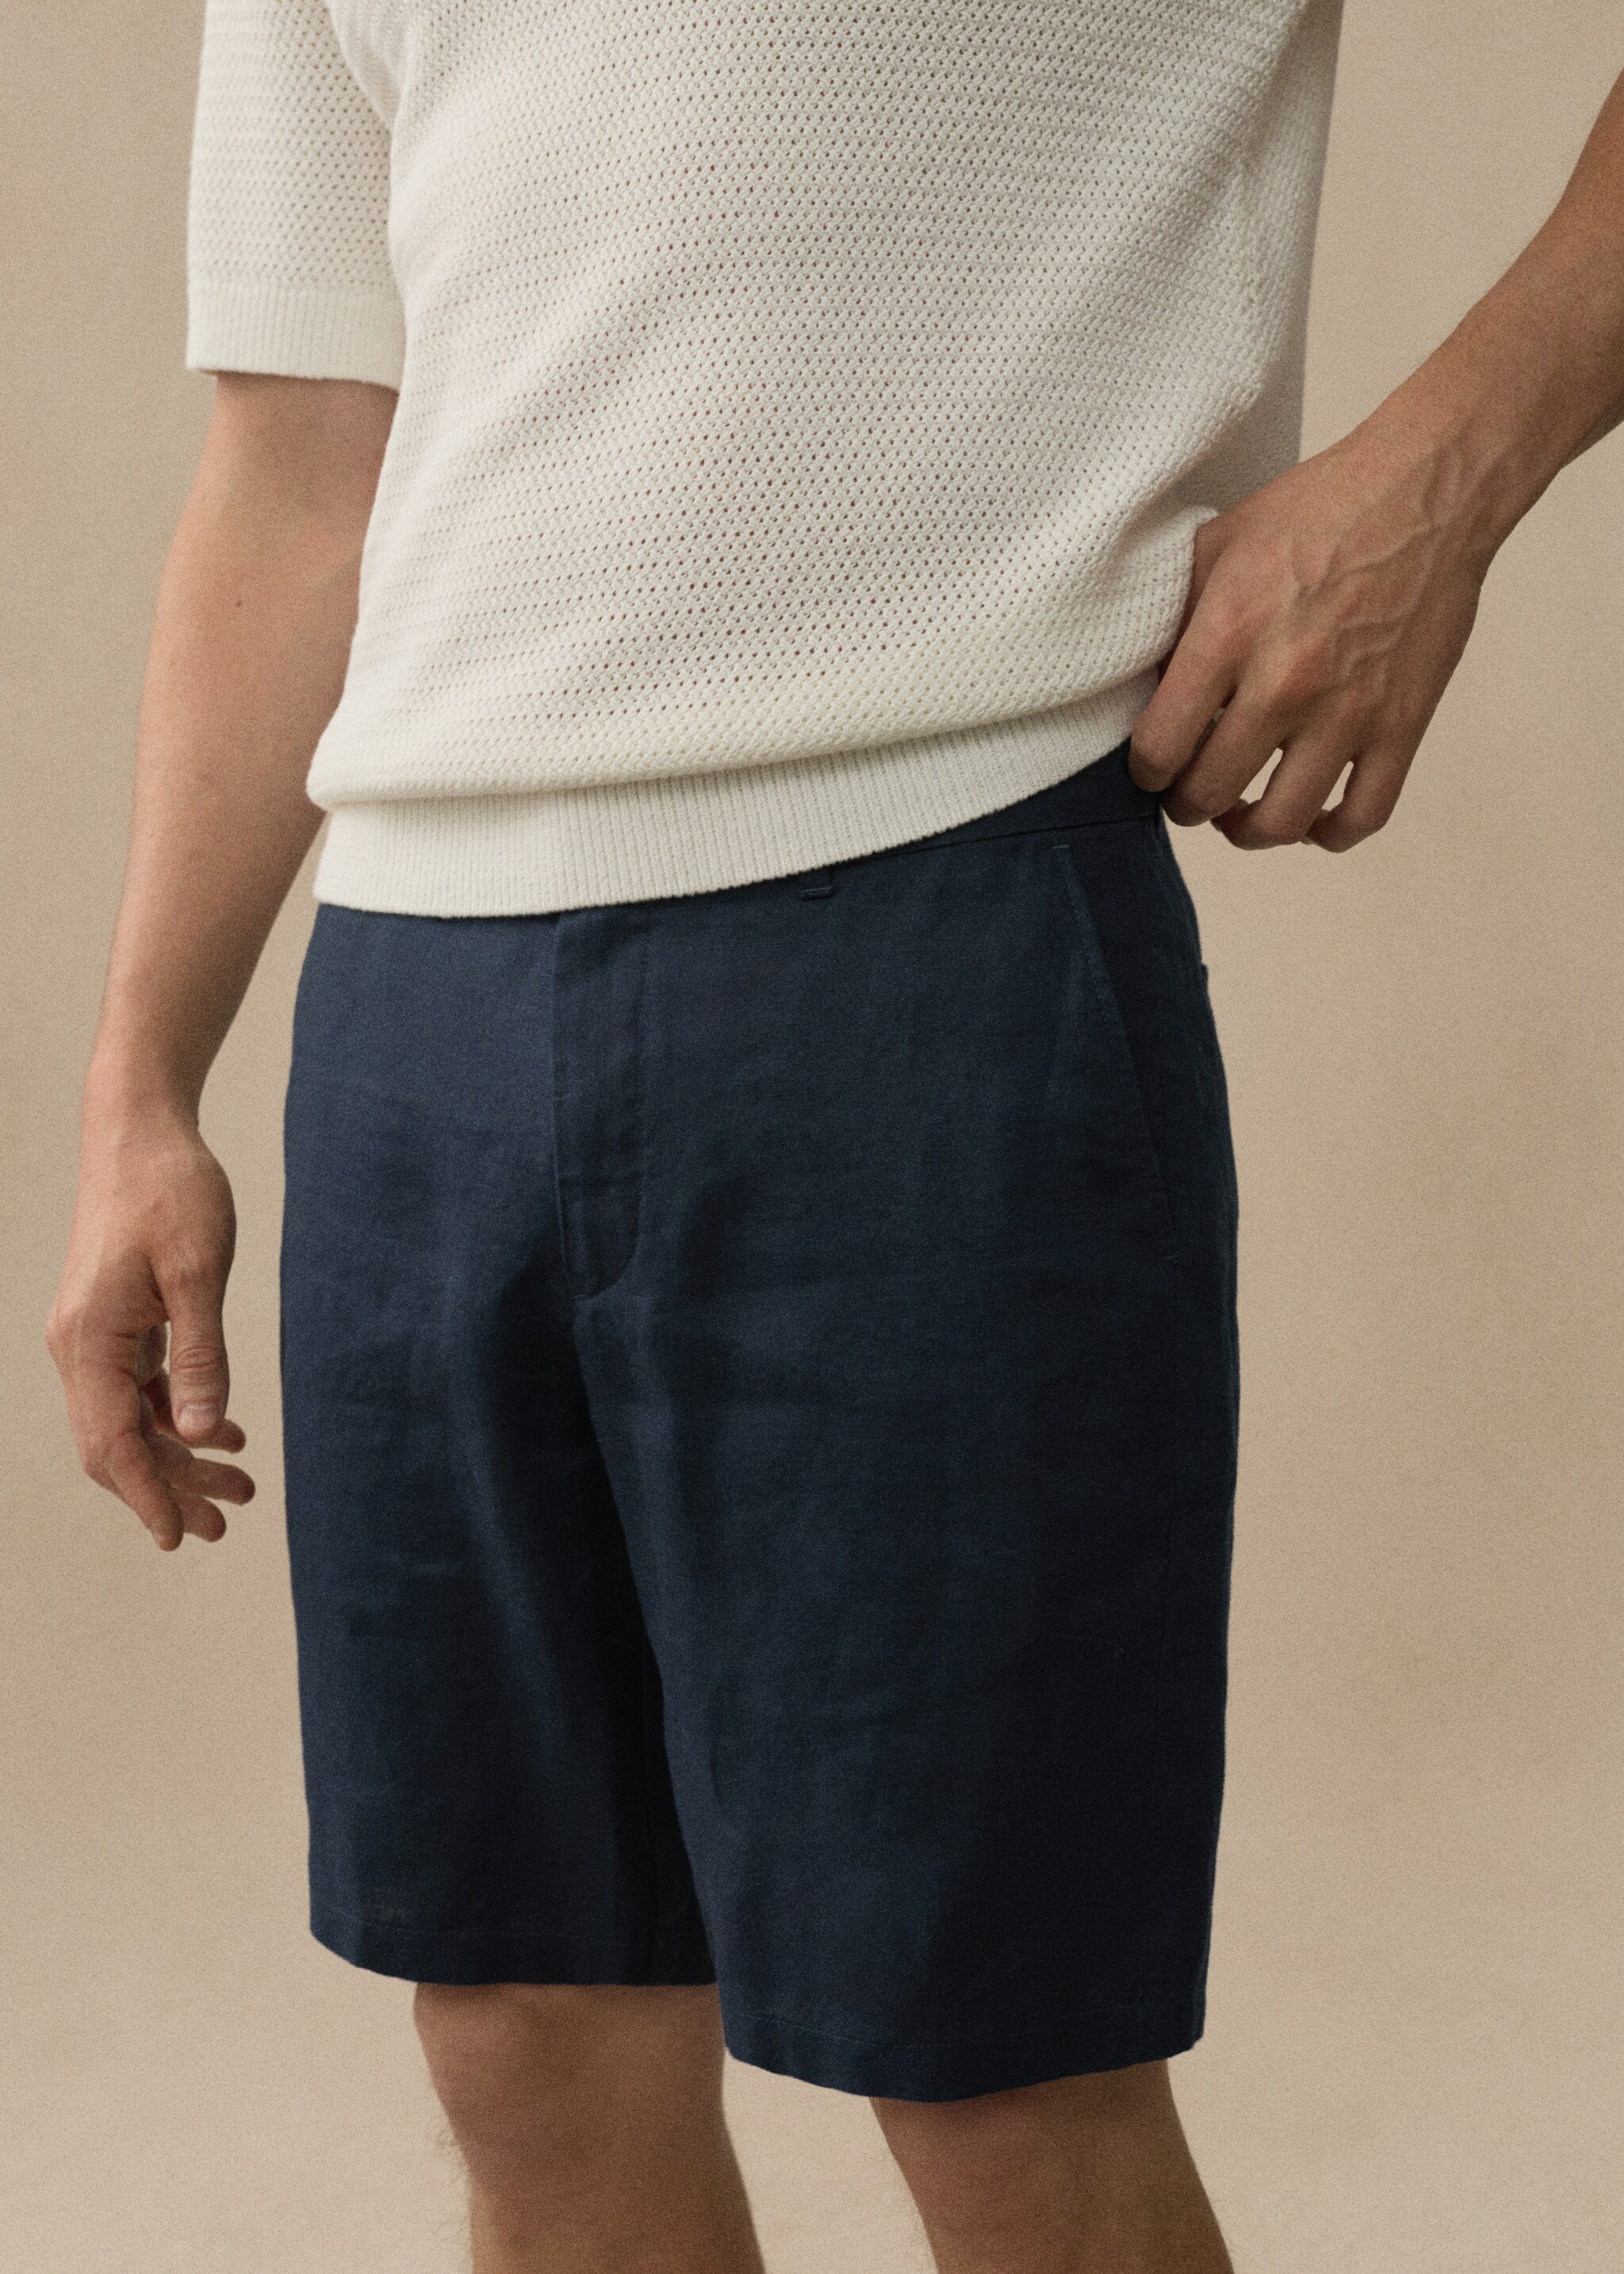 100% linen shorts - Details of the article 3